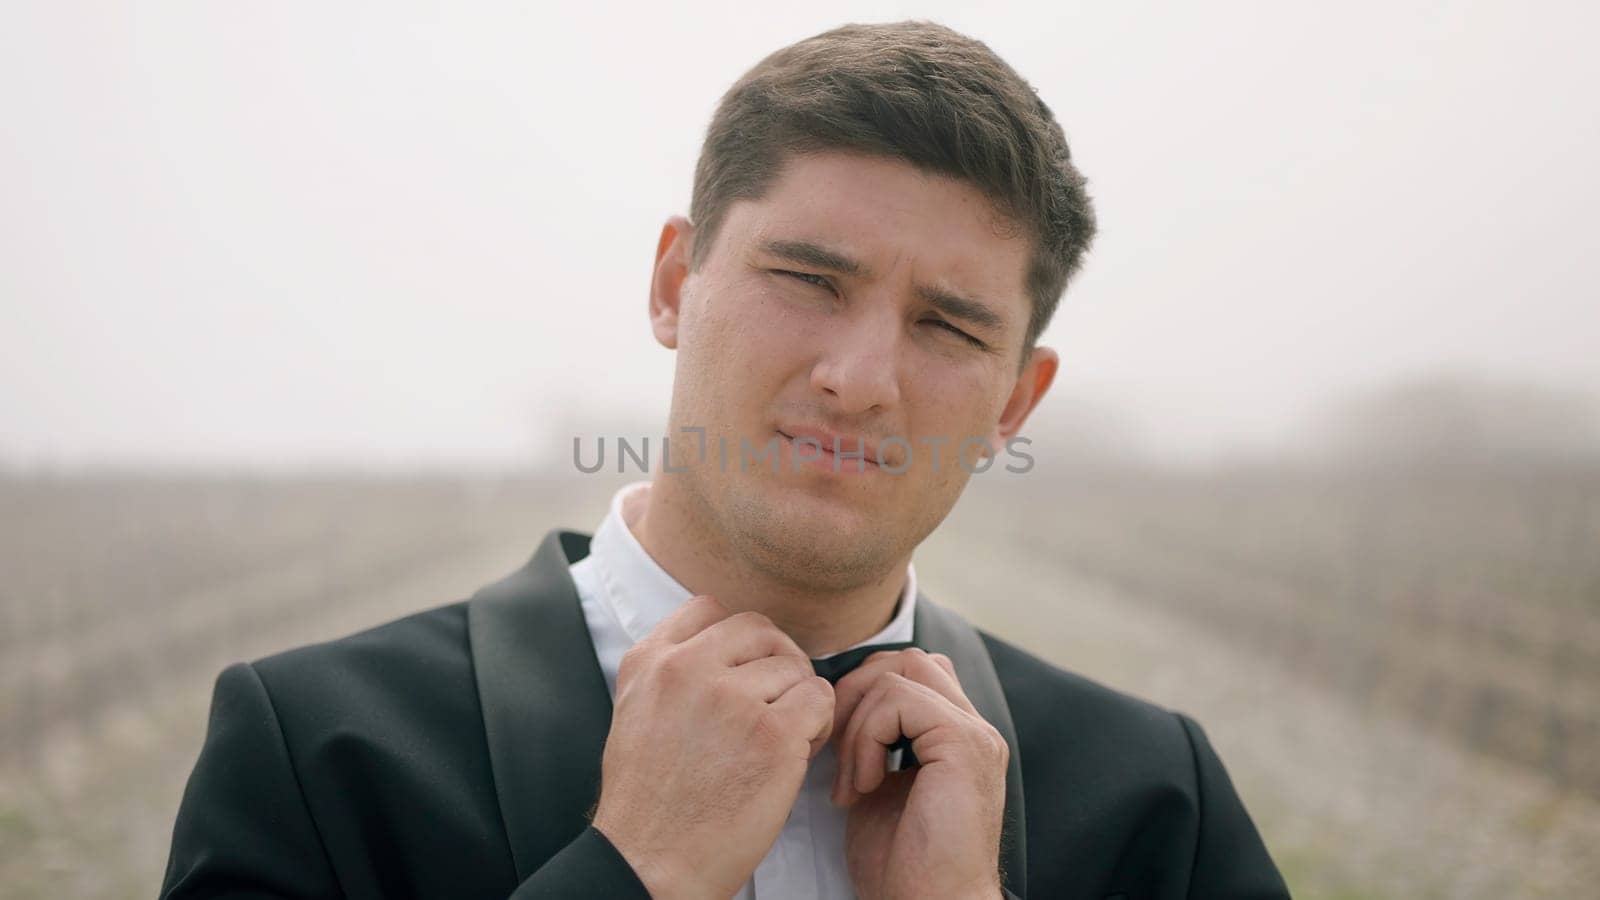 Young posing man in a suit. Action.Handsome man in a glamorous suit fixes his bow tie and looks at the camera. High quality 4k footage